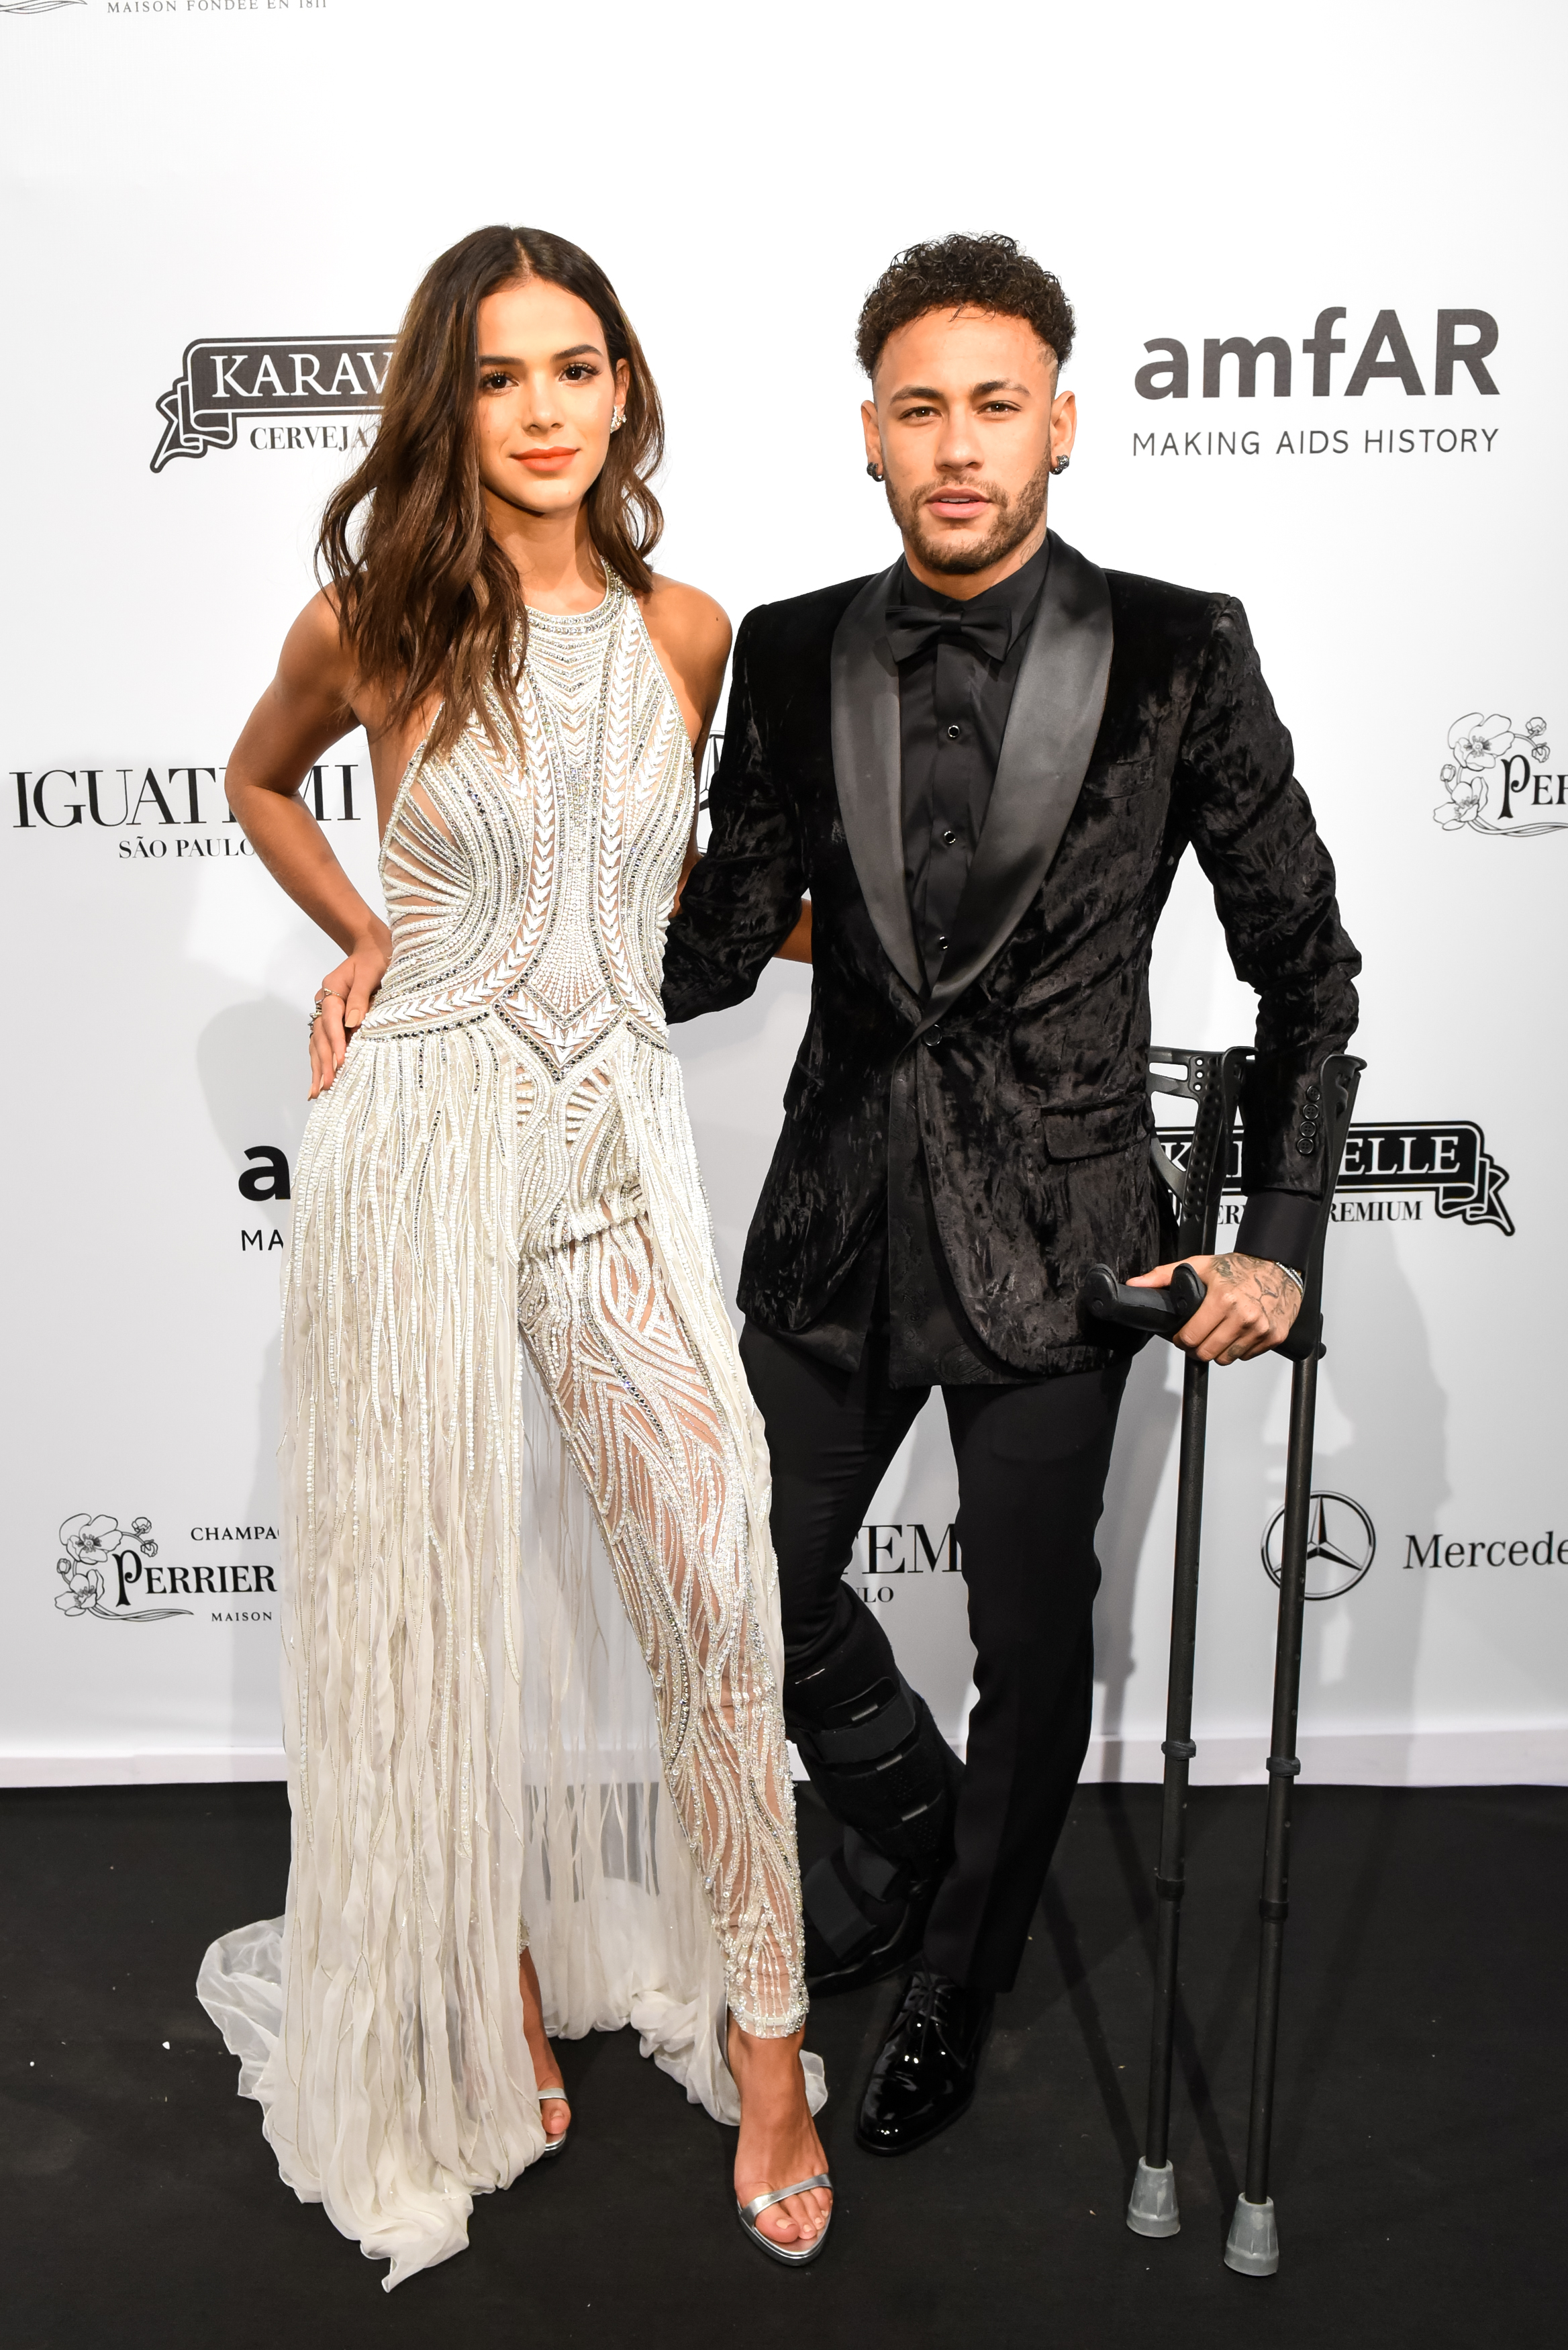 Bruna Marquezine and Neymar Jr. pose at the 2018 amfAR gala Sao Paulo at the home of Dinho Diniz on April 13, 2018, in Sao Paulo, Brazil | Source: Getty Images